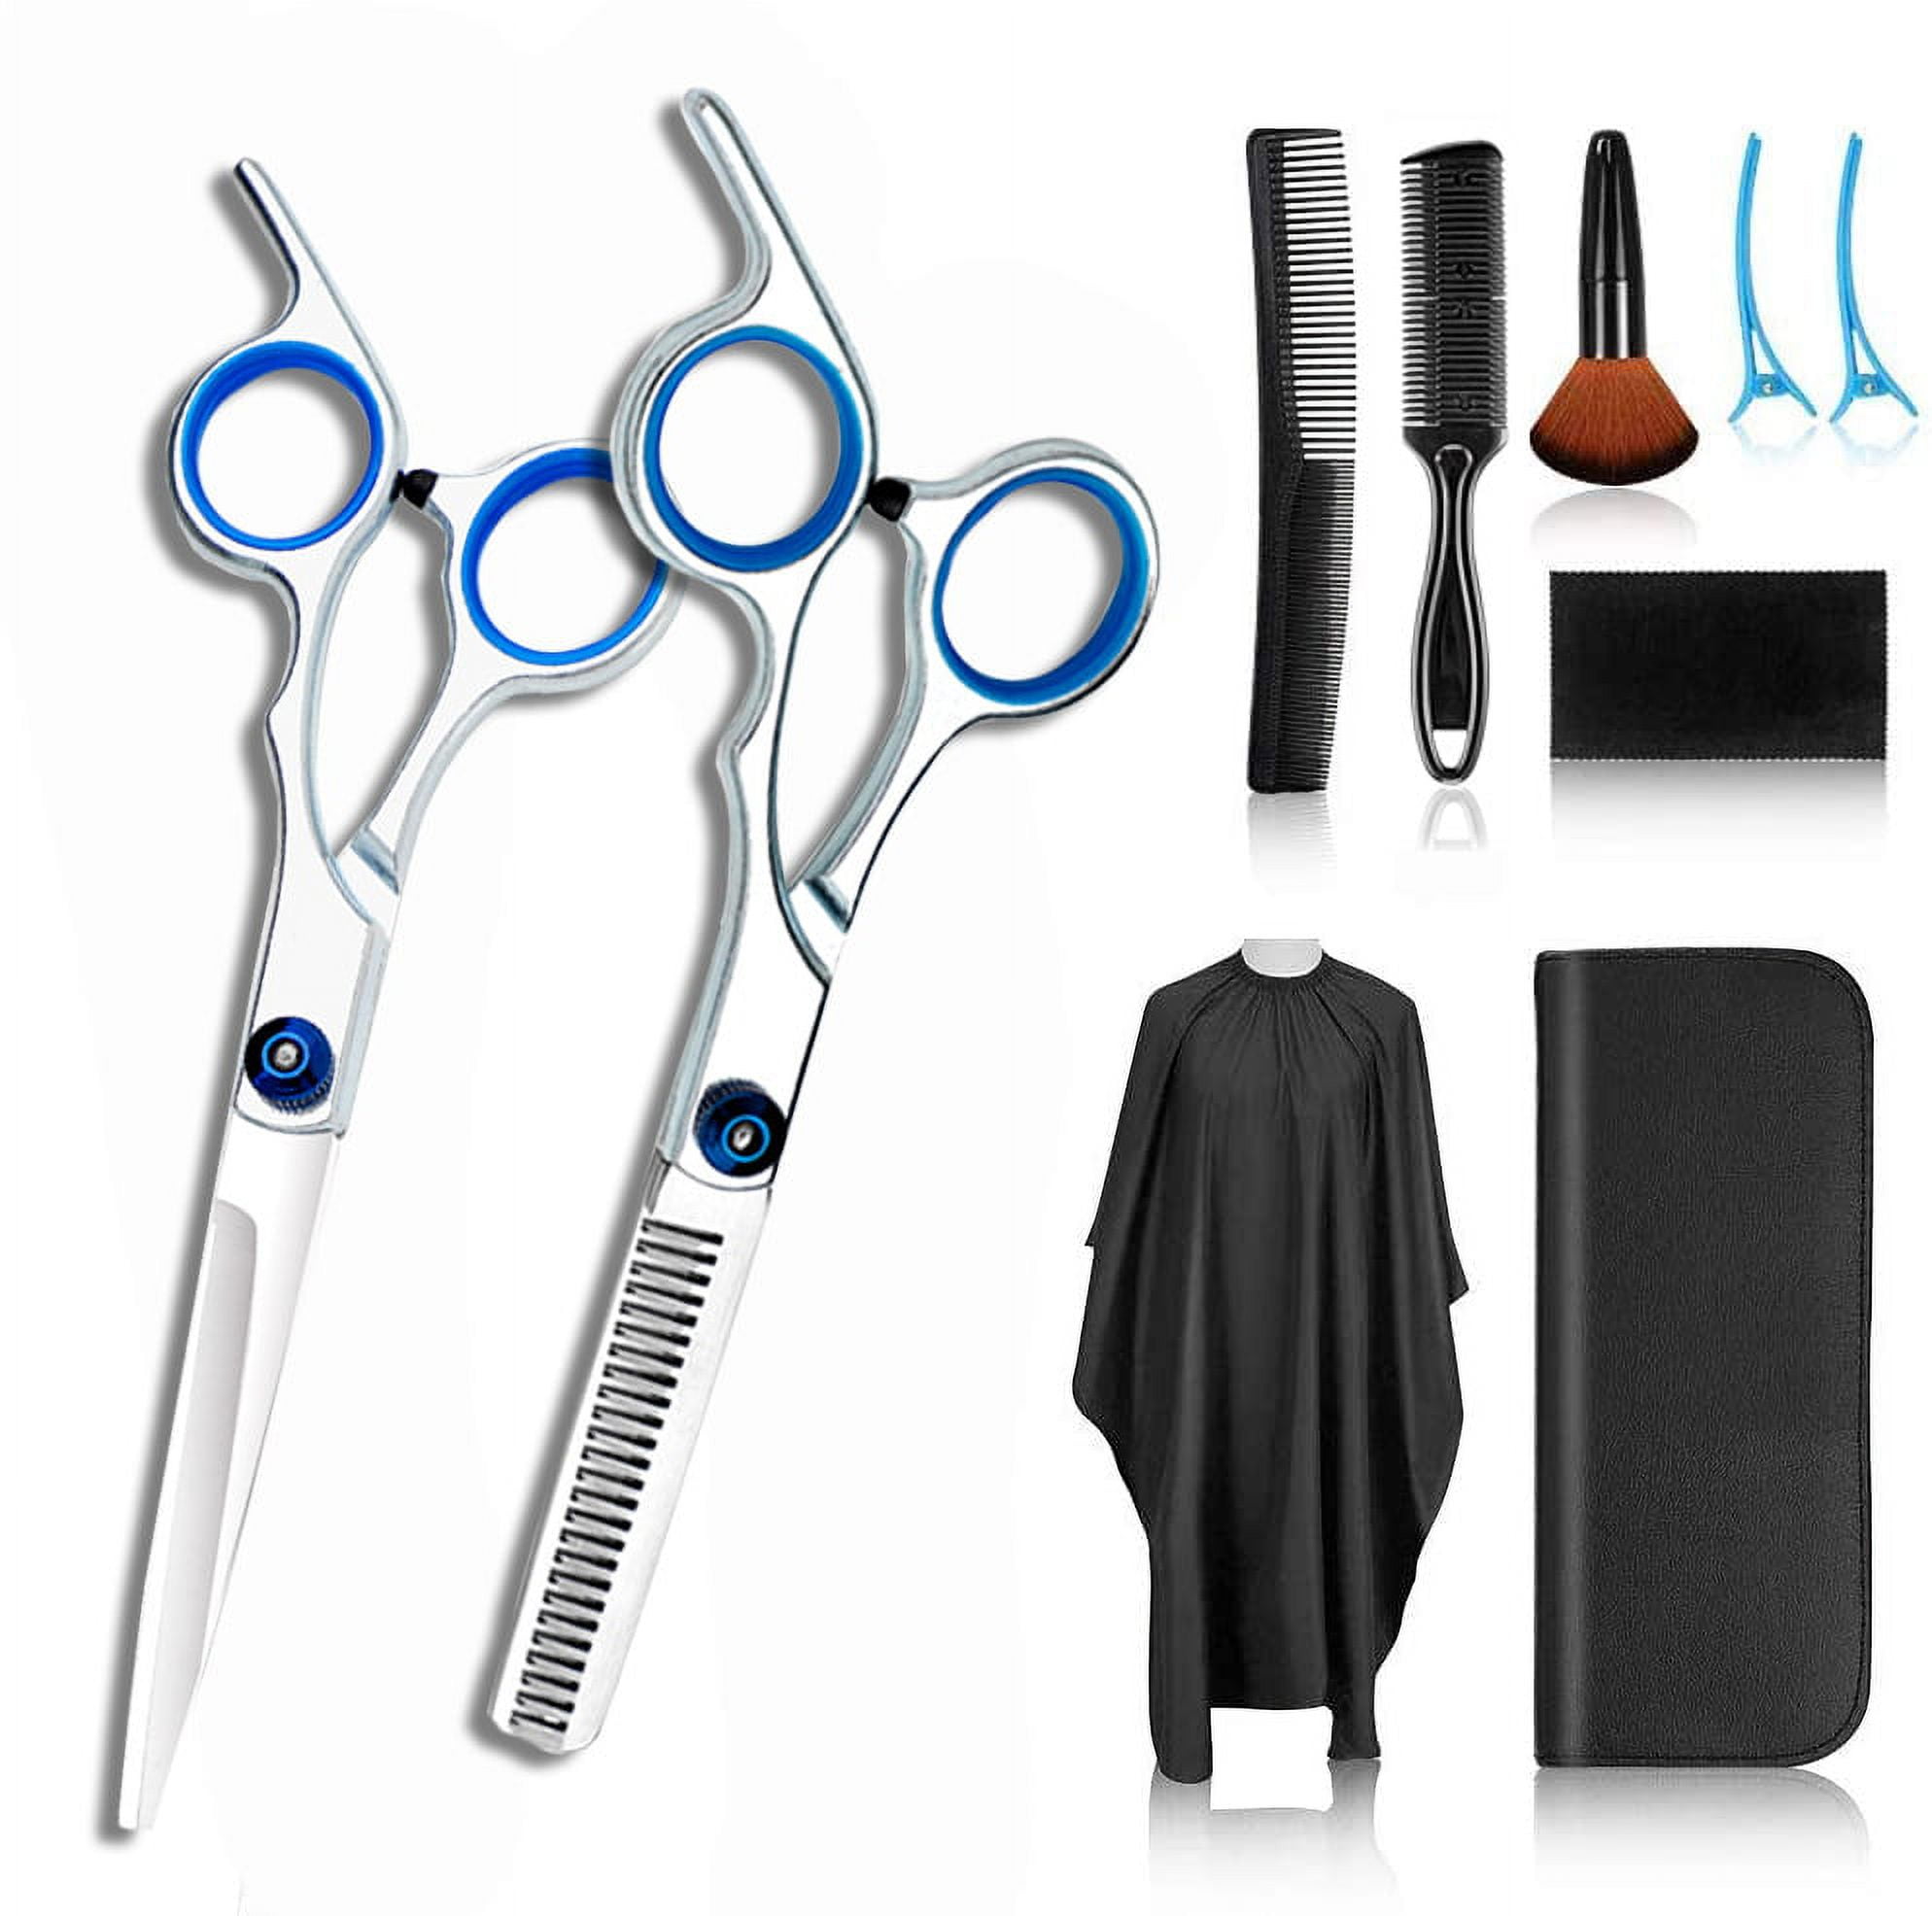  Sirabe 10 PCS Hair Cutting Scissors Set, Professional Haircut  Scissors Kit with Cutting Scissors,Thinning Scissors, Comb,Cape, Clips,  Black Hairdressing Shears Set for Barber, Salon, Home : Beauty & Personal  Care